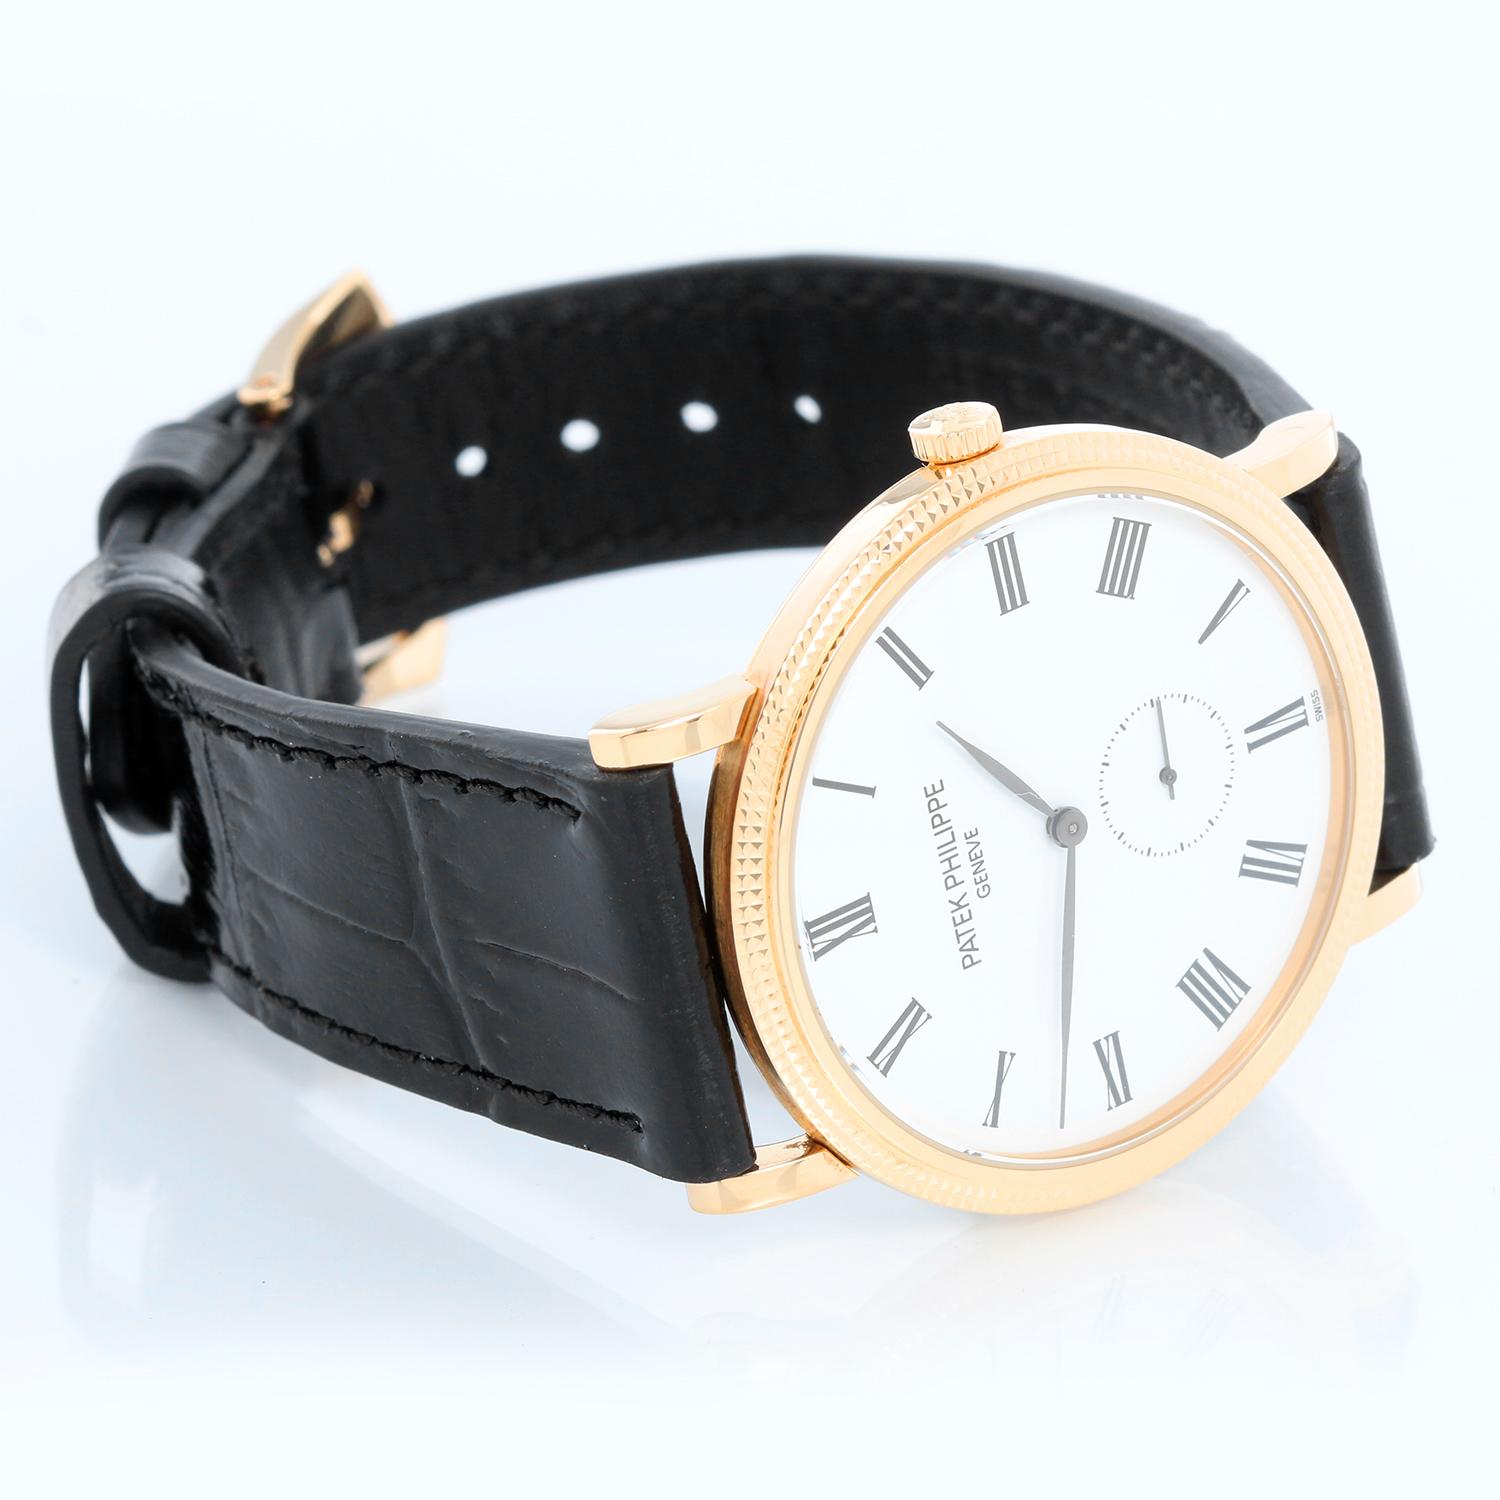 Patek Philippe Calatrava 18k Yellow Gold Men's Watch  5119-J (or 5119J-001) - Manual winding. 18k yellow gold case with hobnail bezel and exposition back (36mm diameter). White dial with black Roman numerals; subseconds at 6 o'clock. Strap band with